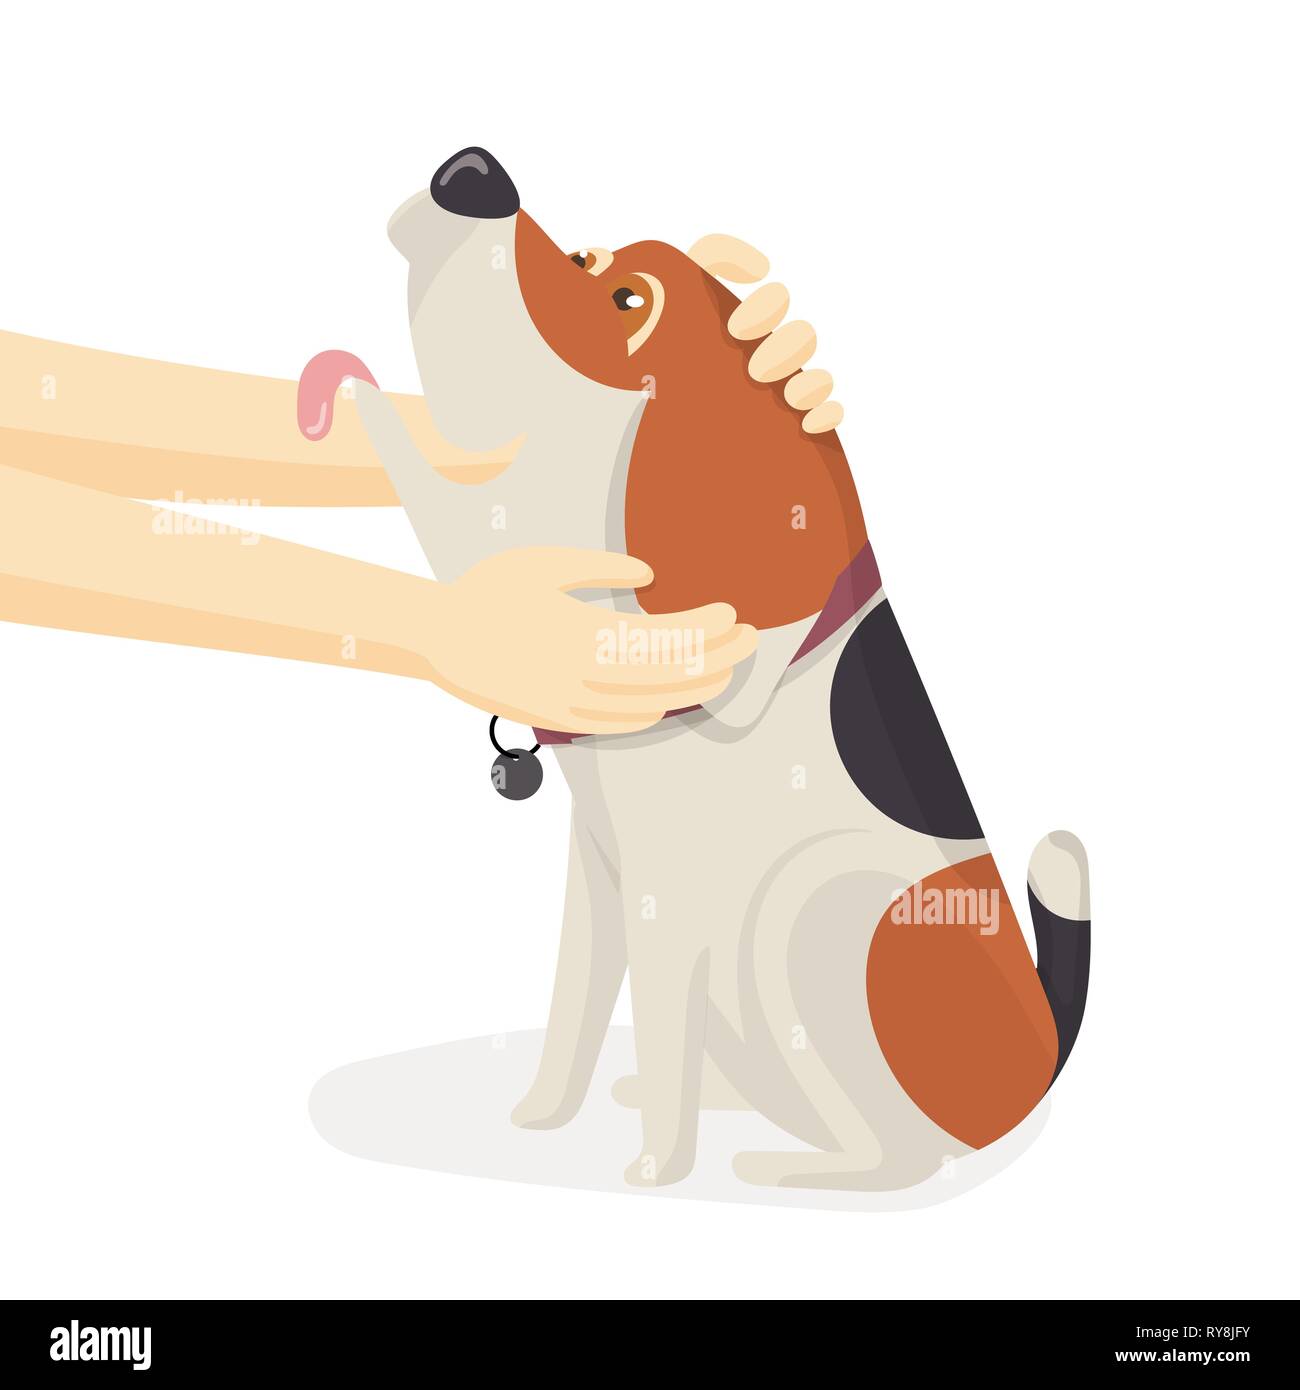 Human hand embrace adorable beagle dog sitting on floor. Lovely friendship between animal and owner. Cartoon vector illustration Stock Vector